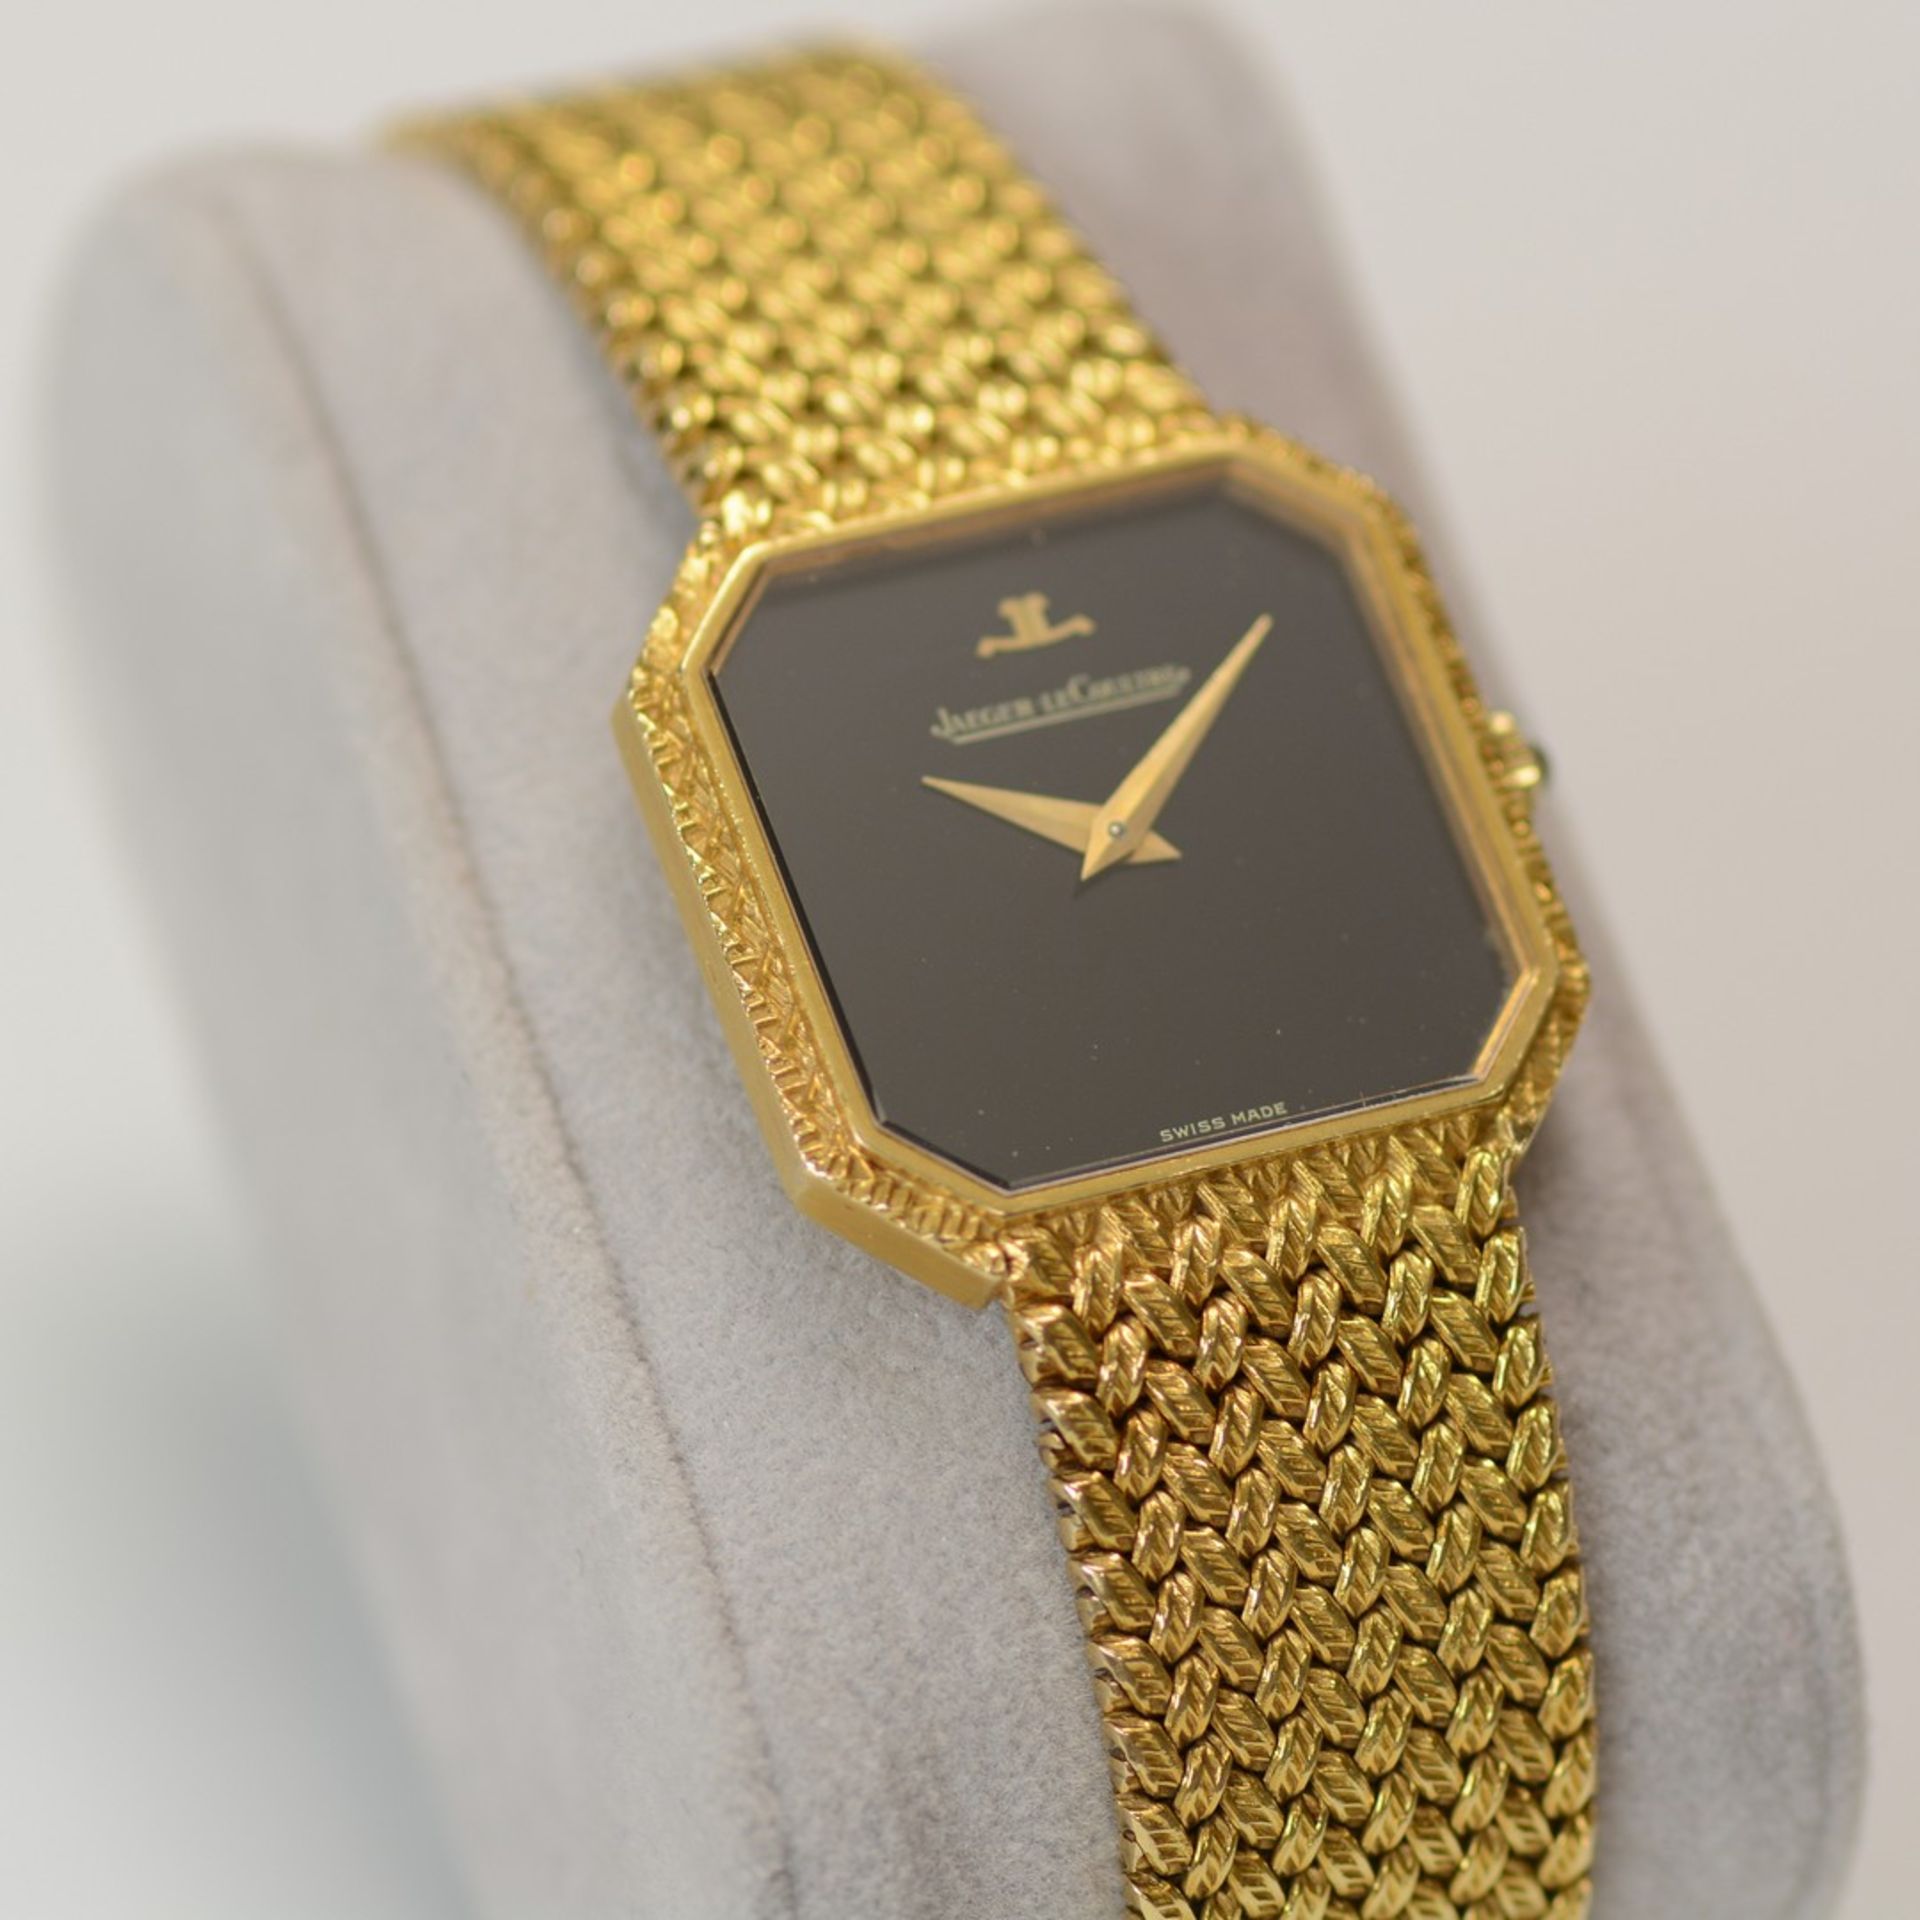 Jaeger-LeCoultre / Vintage - Unisex Yellow gold Wrist Watch - Image 7 of 14